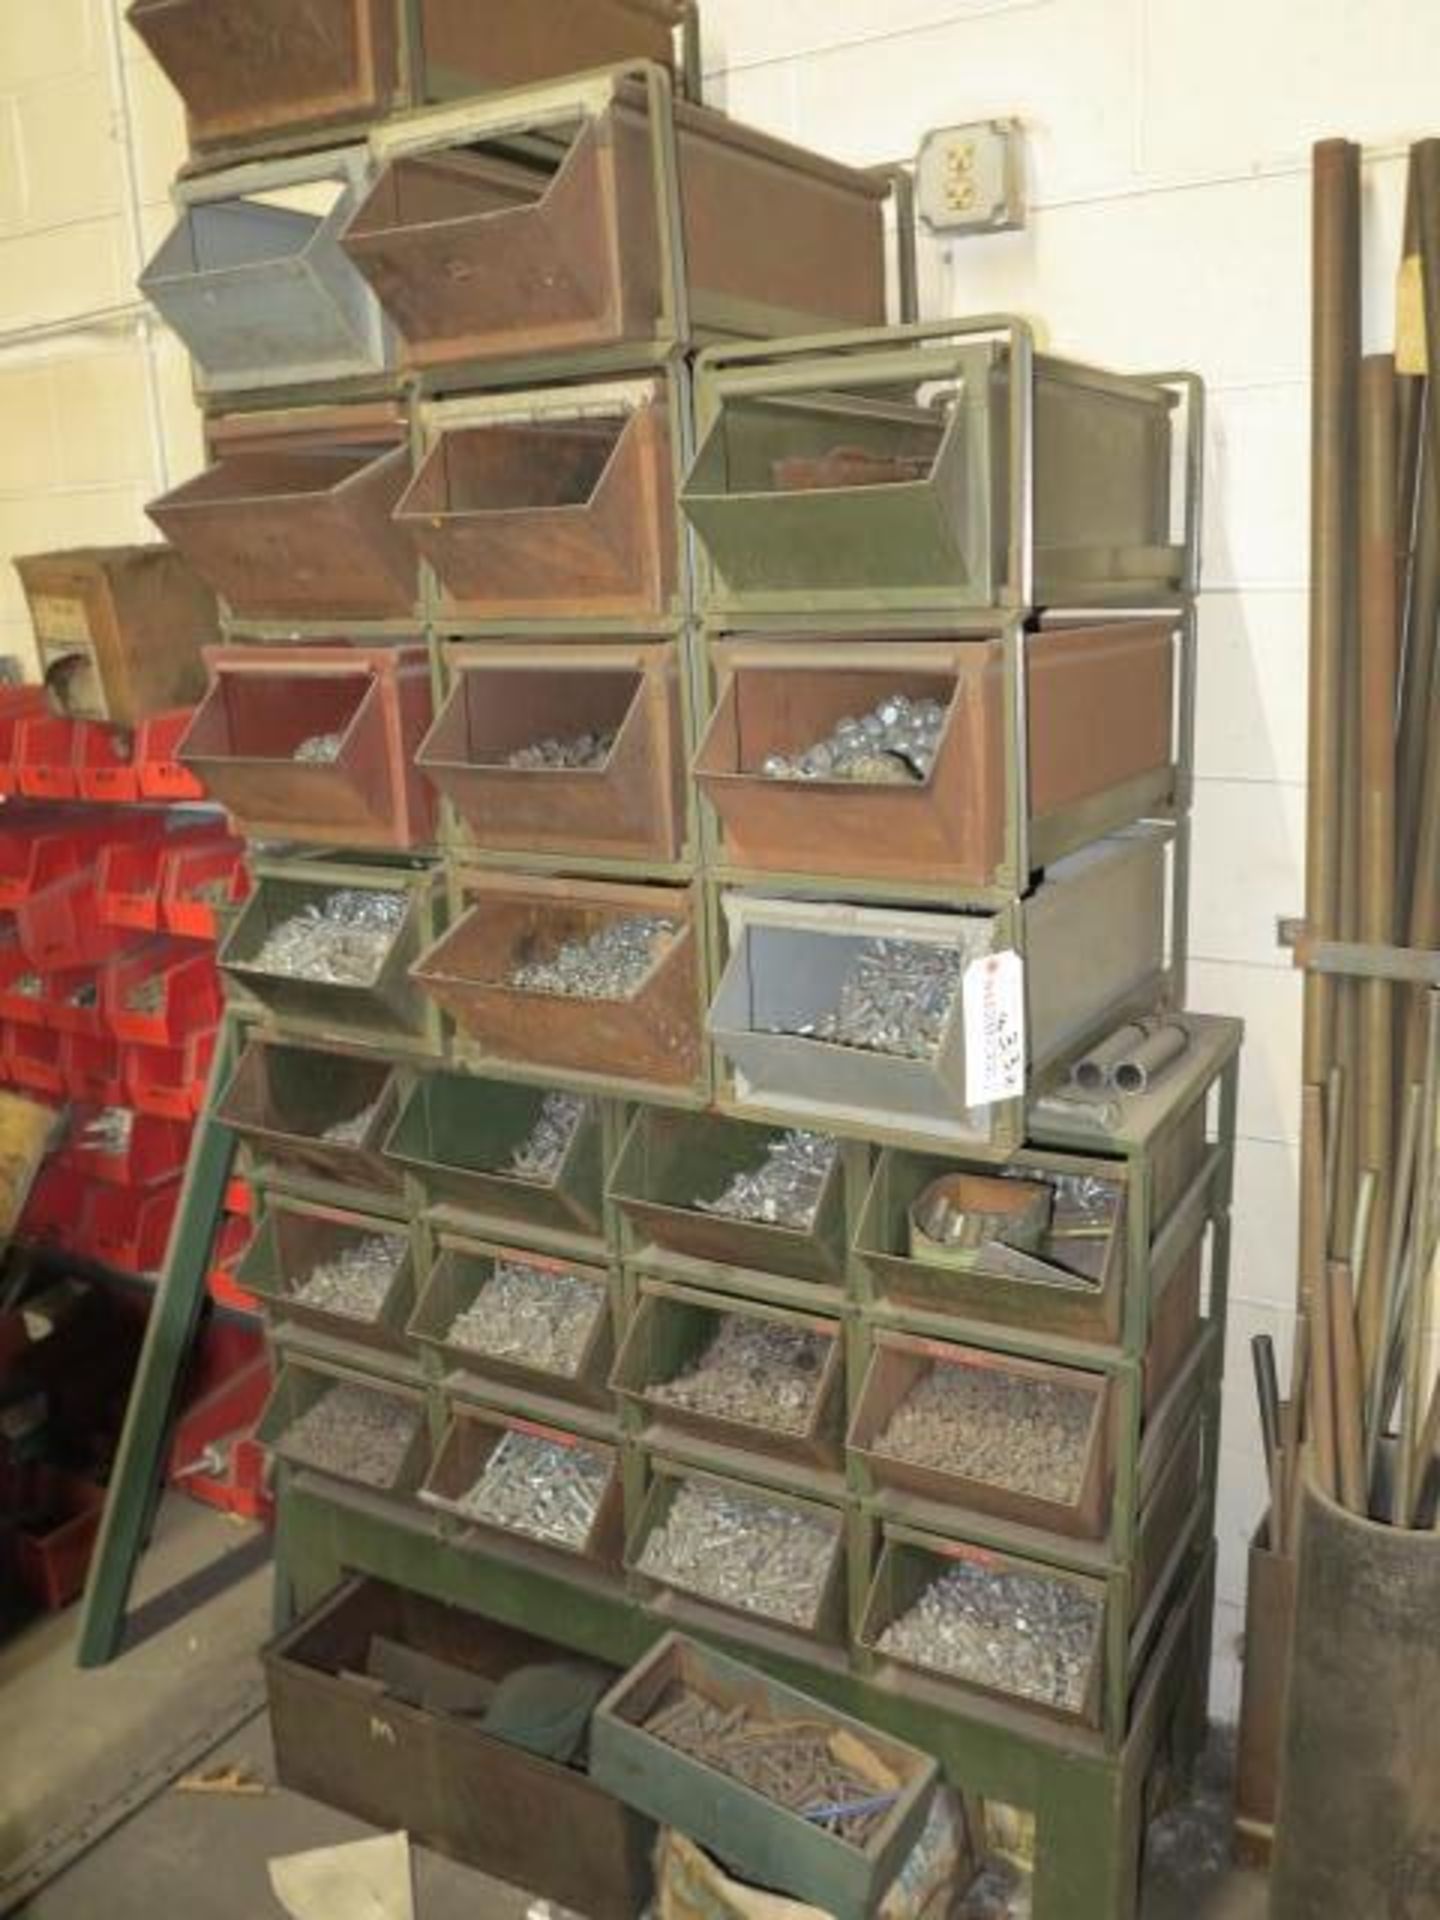 Lot Stack Bins with Nuts and Bolts